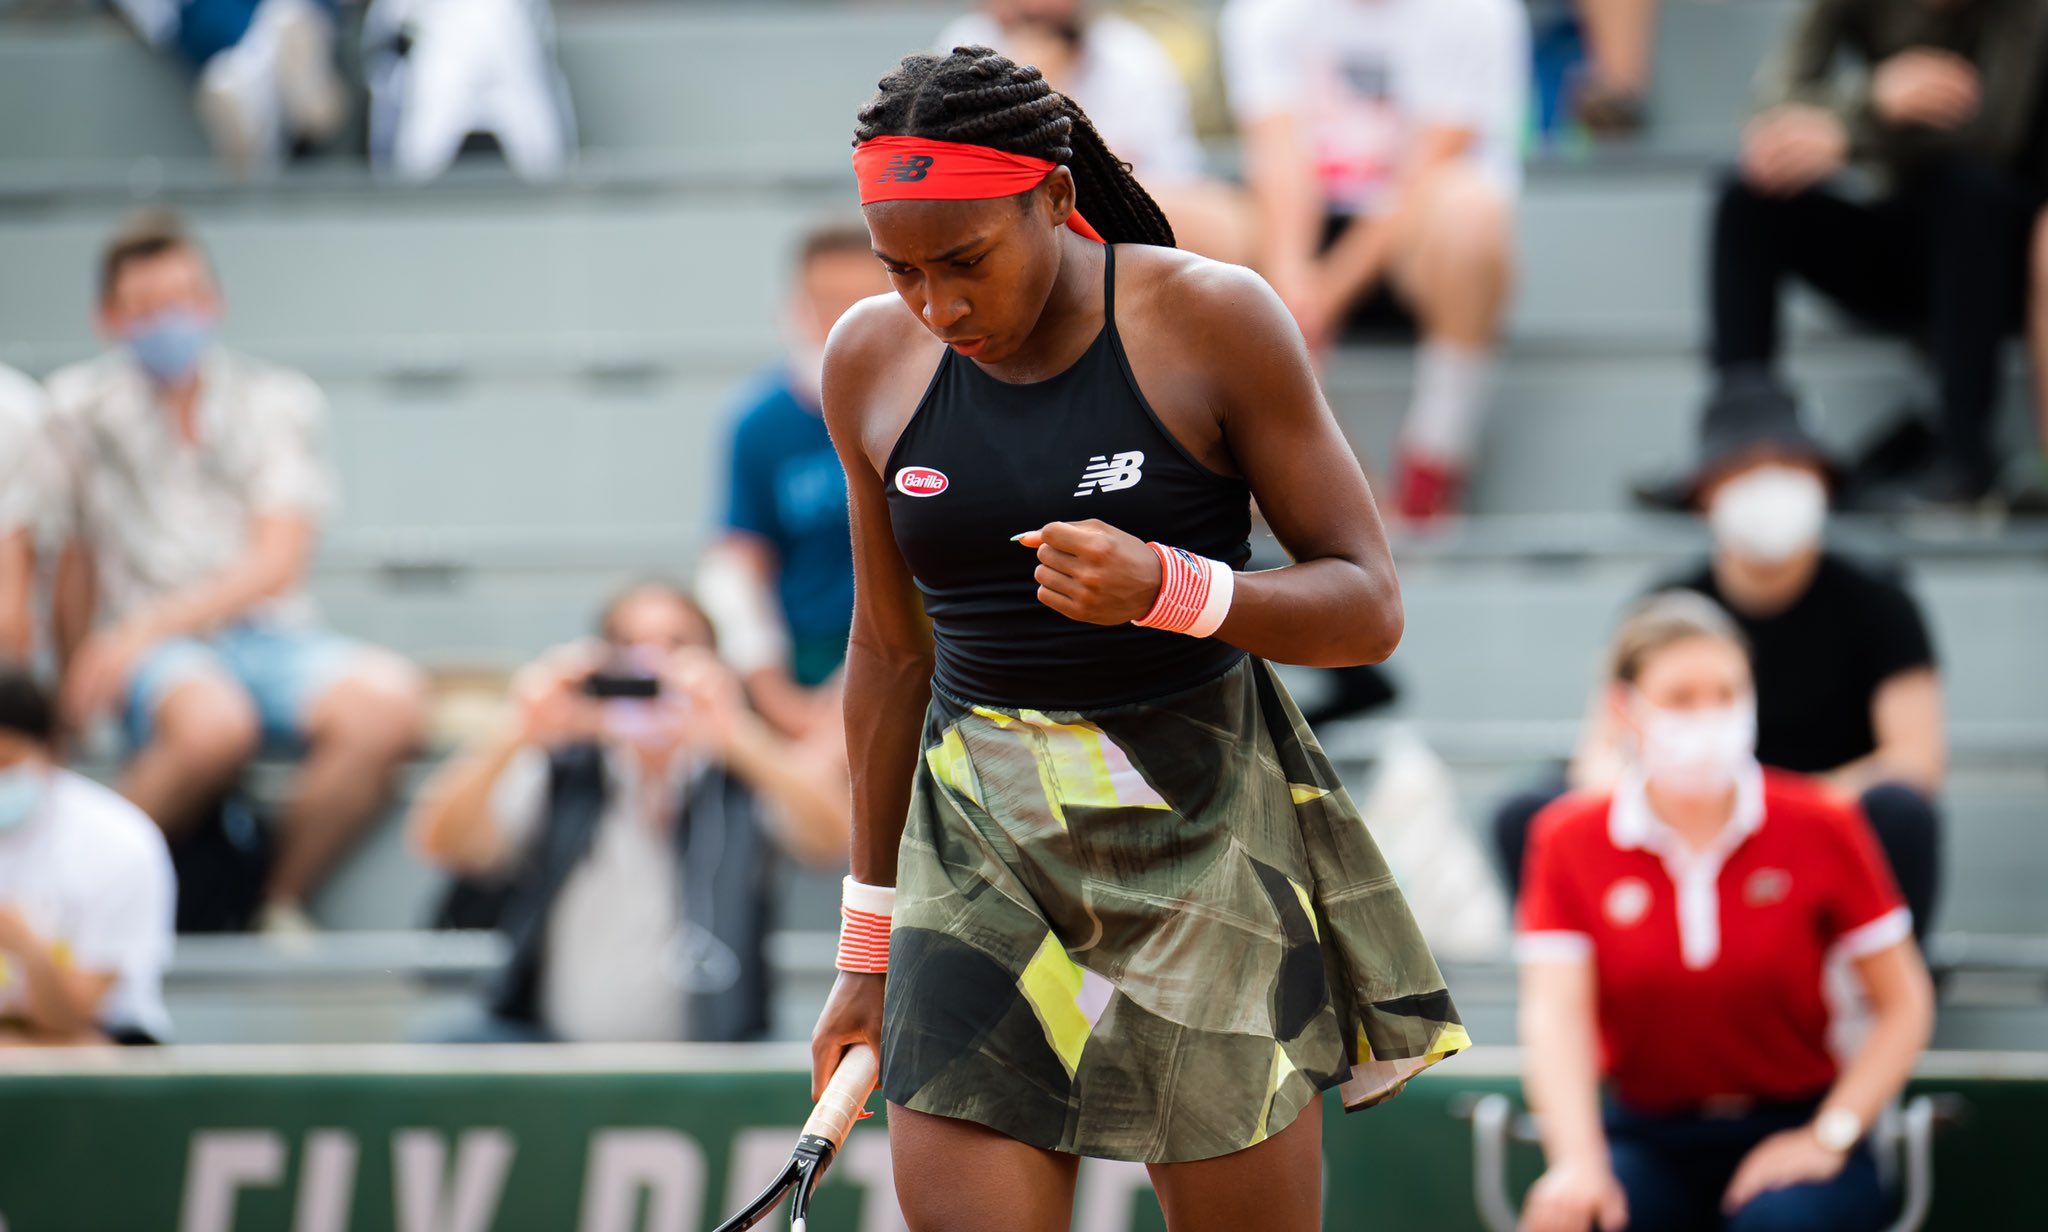 Coco Gauff, 17, youngest player to enter French Open quarter finals